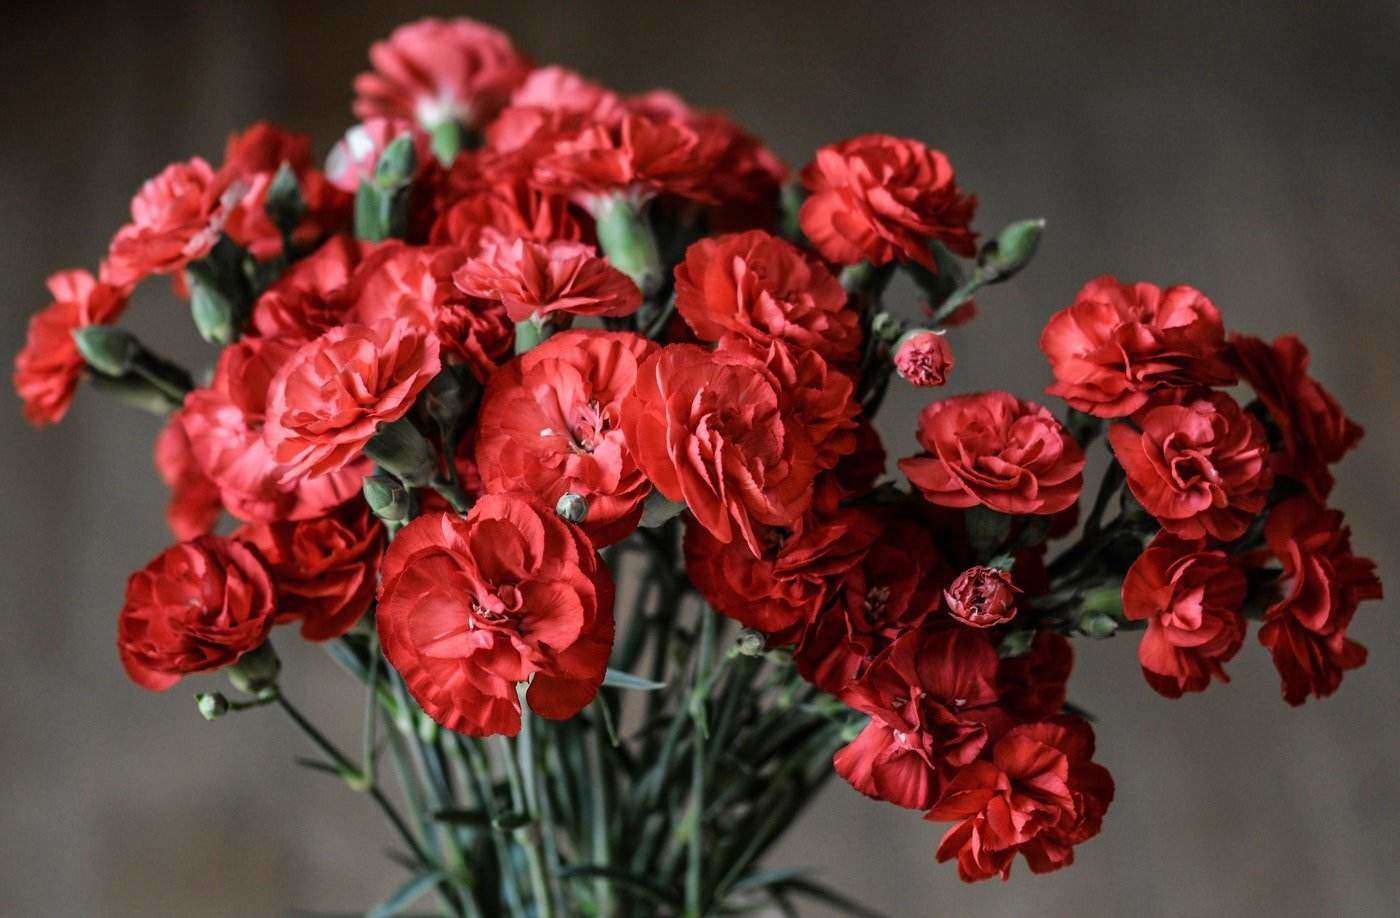 red carnations in vase - 20 most popular flowers